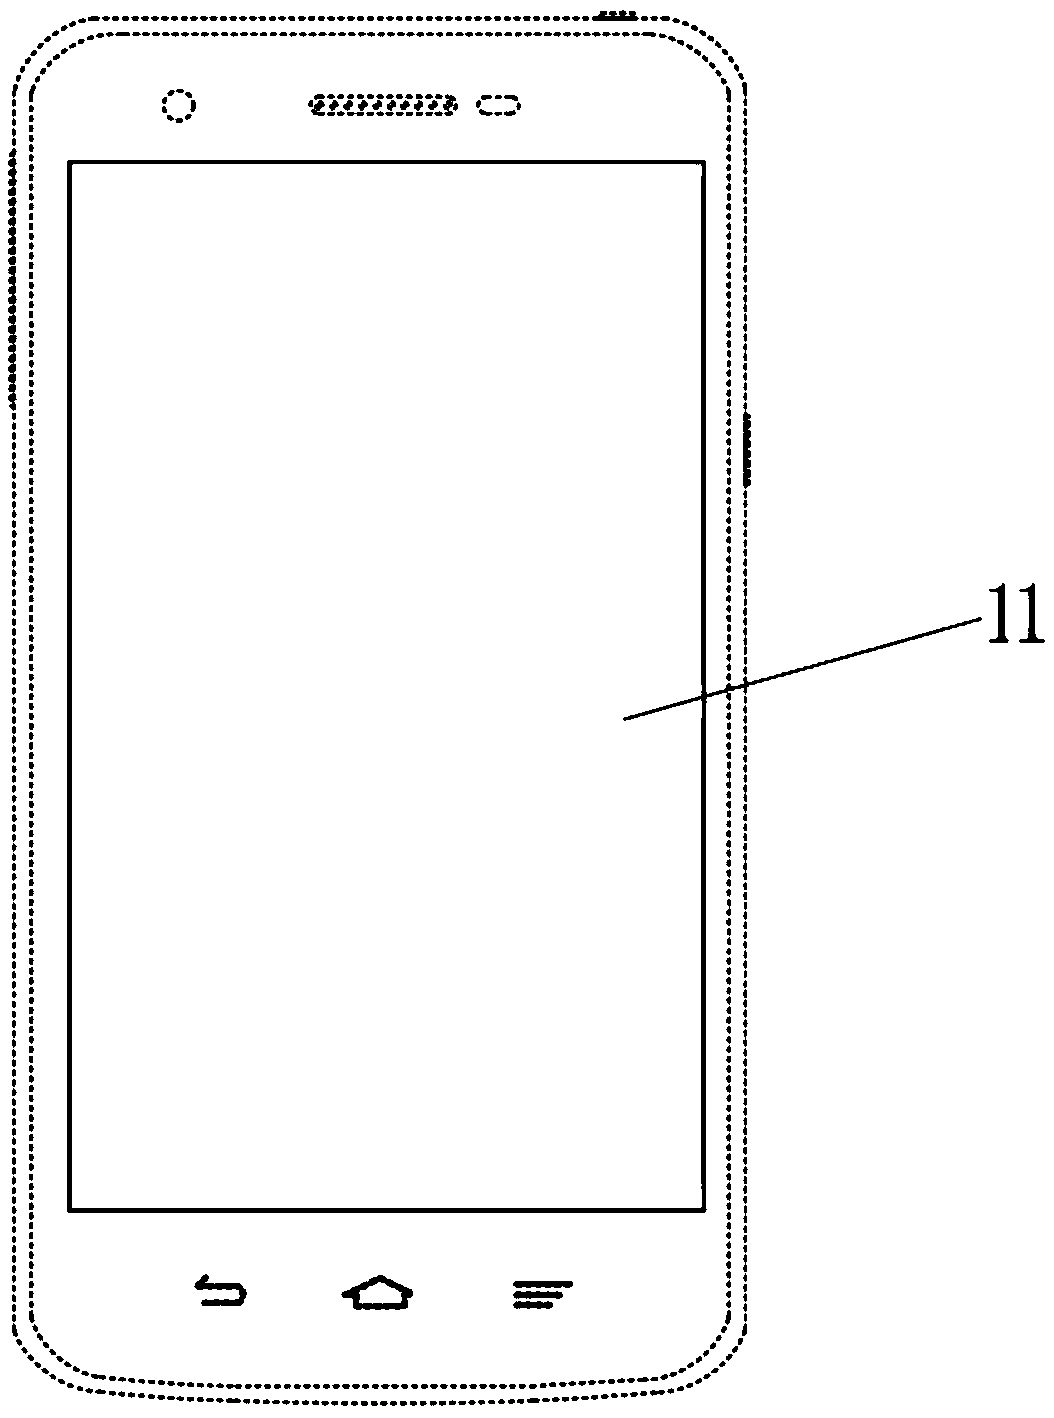 Compound, display panel and display device